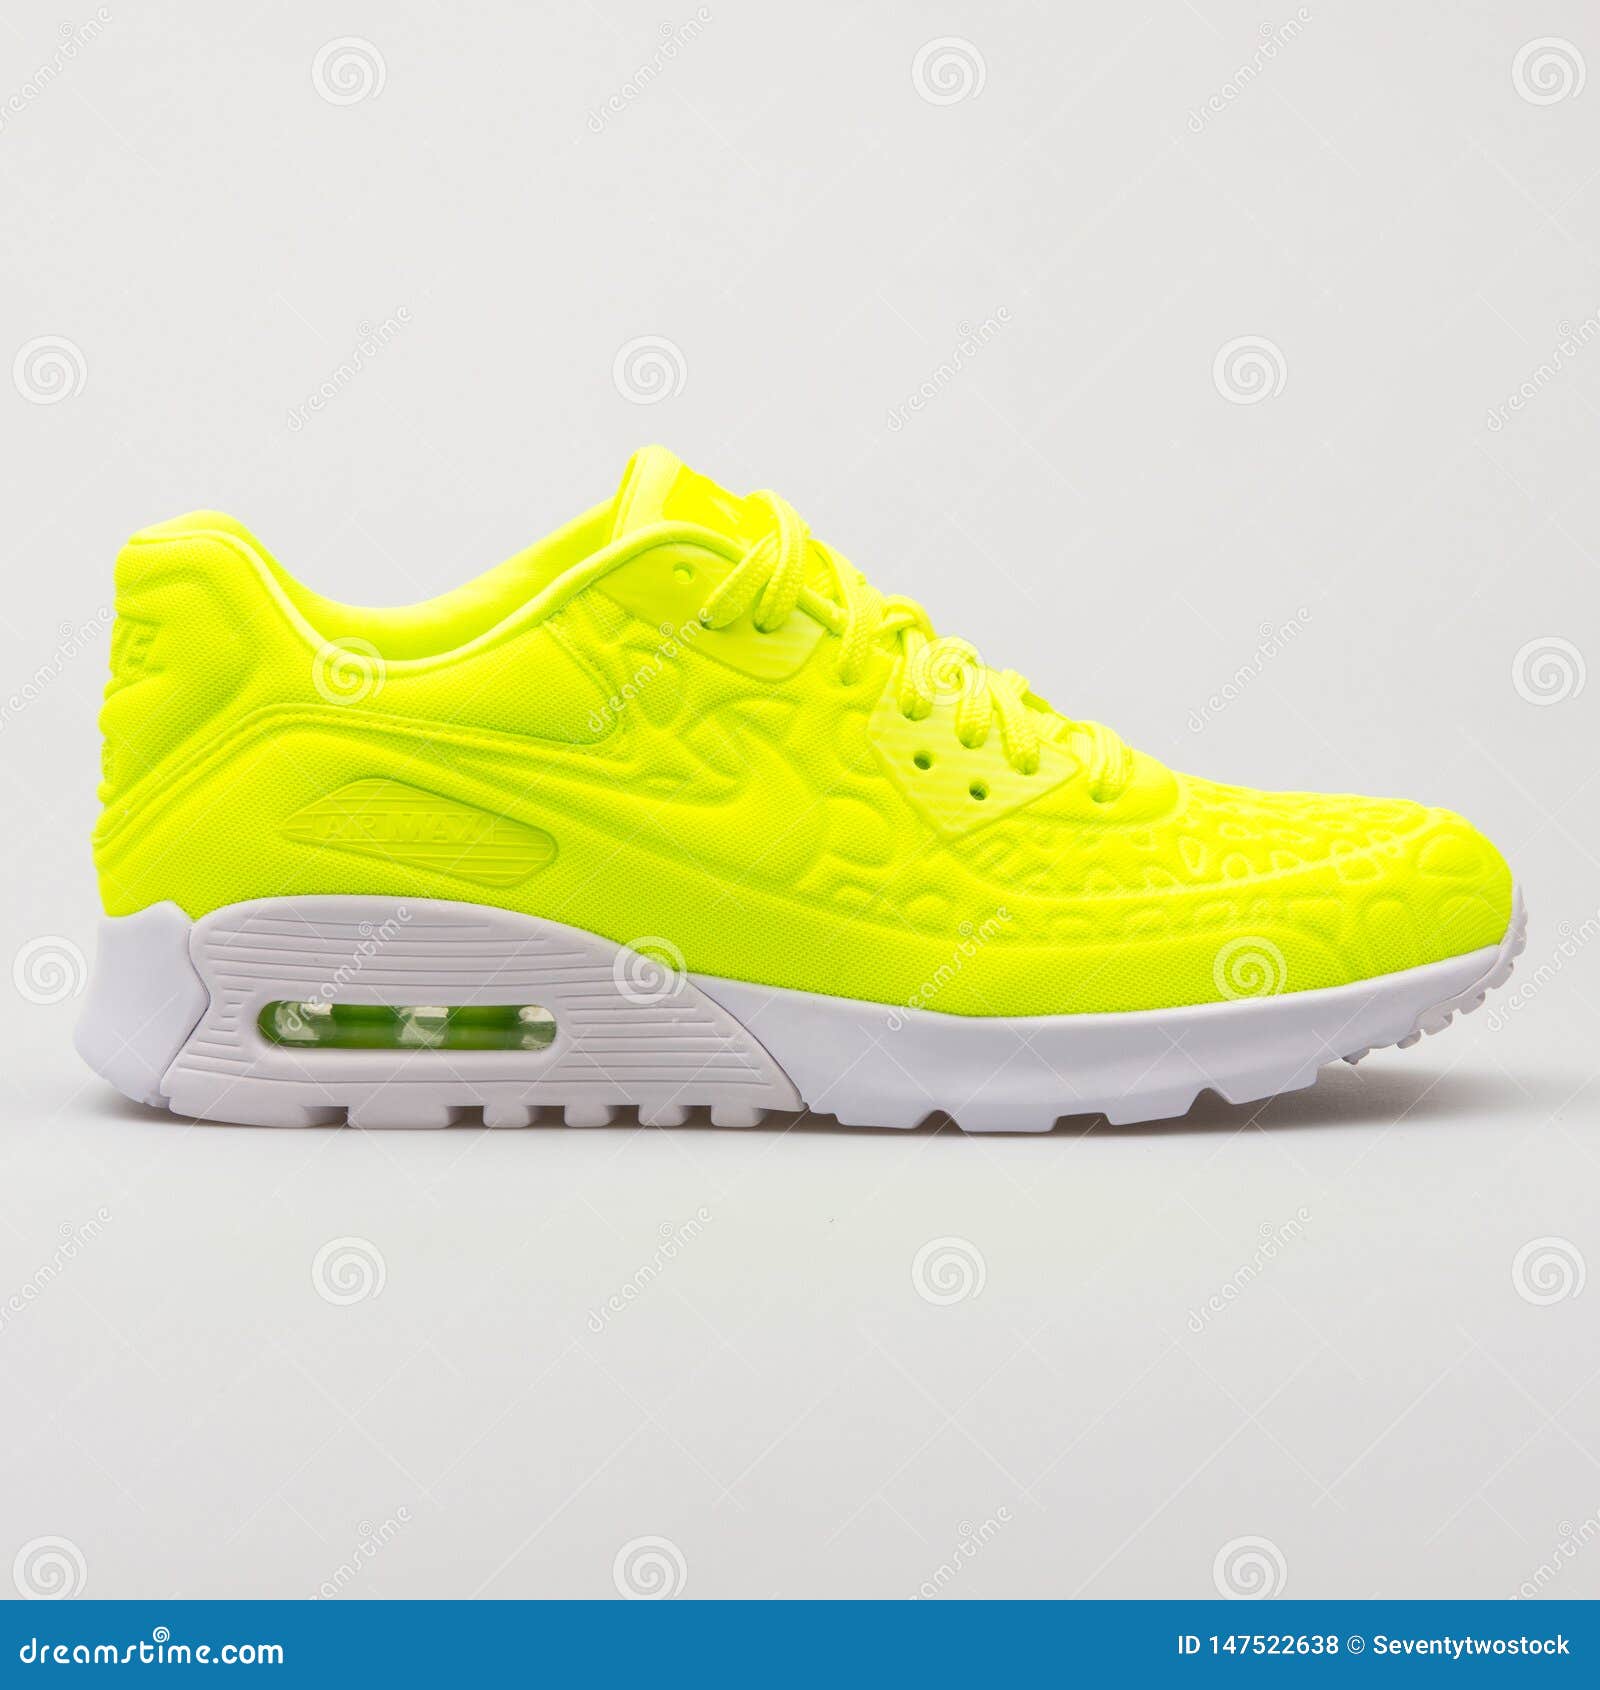 Nike Air Max 90 Ultra Plush Editorial Stock Photo - Image of athletic, side: 147522638